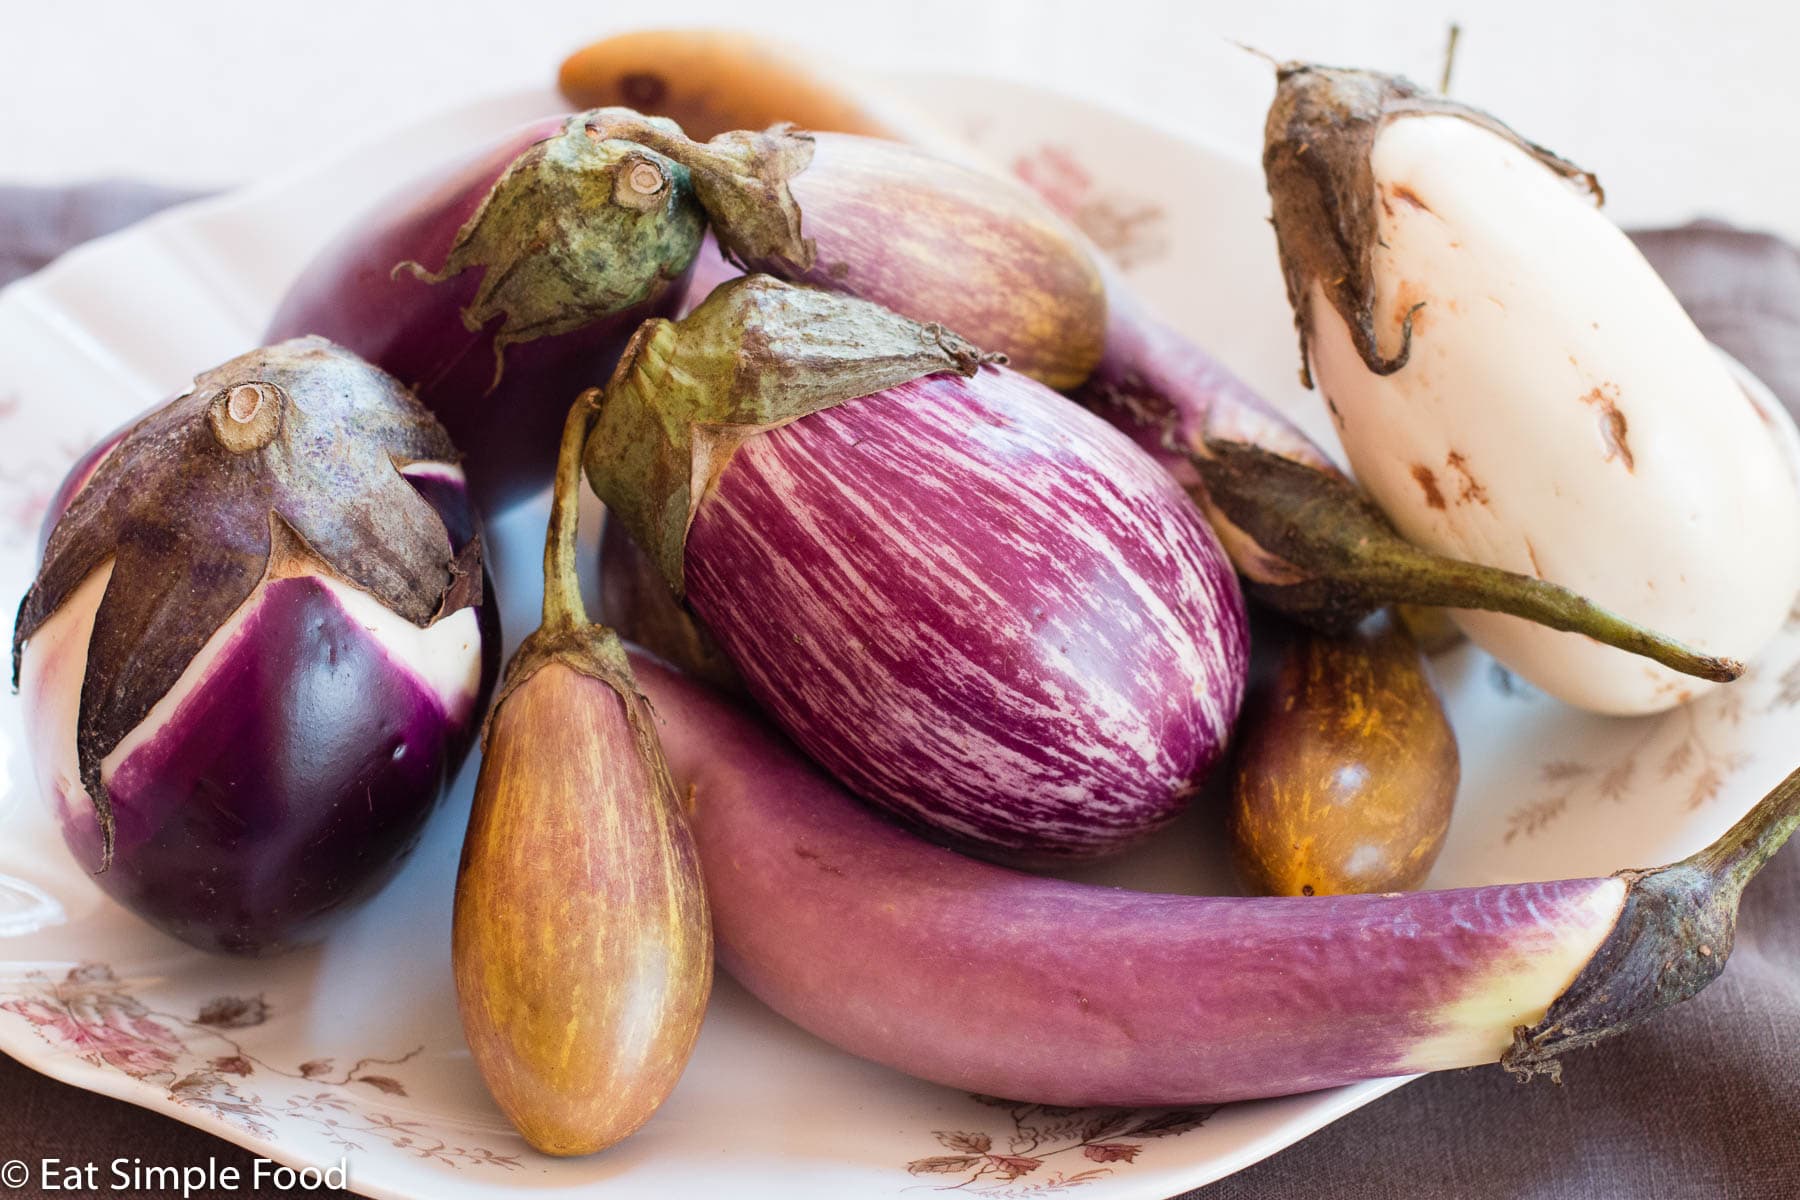 Different Eggplant Varieties -purple, white, light purple, purple striped, long and skinny and fat and short on a white plate.